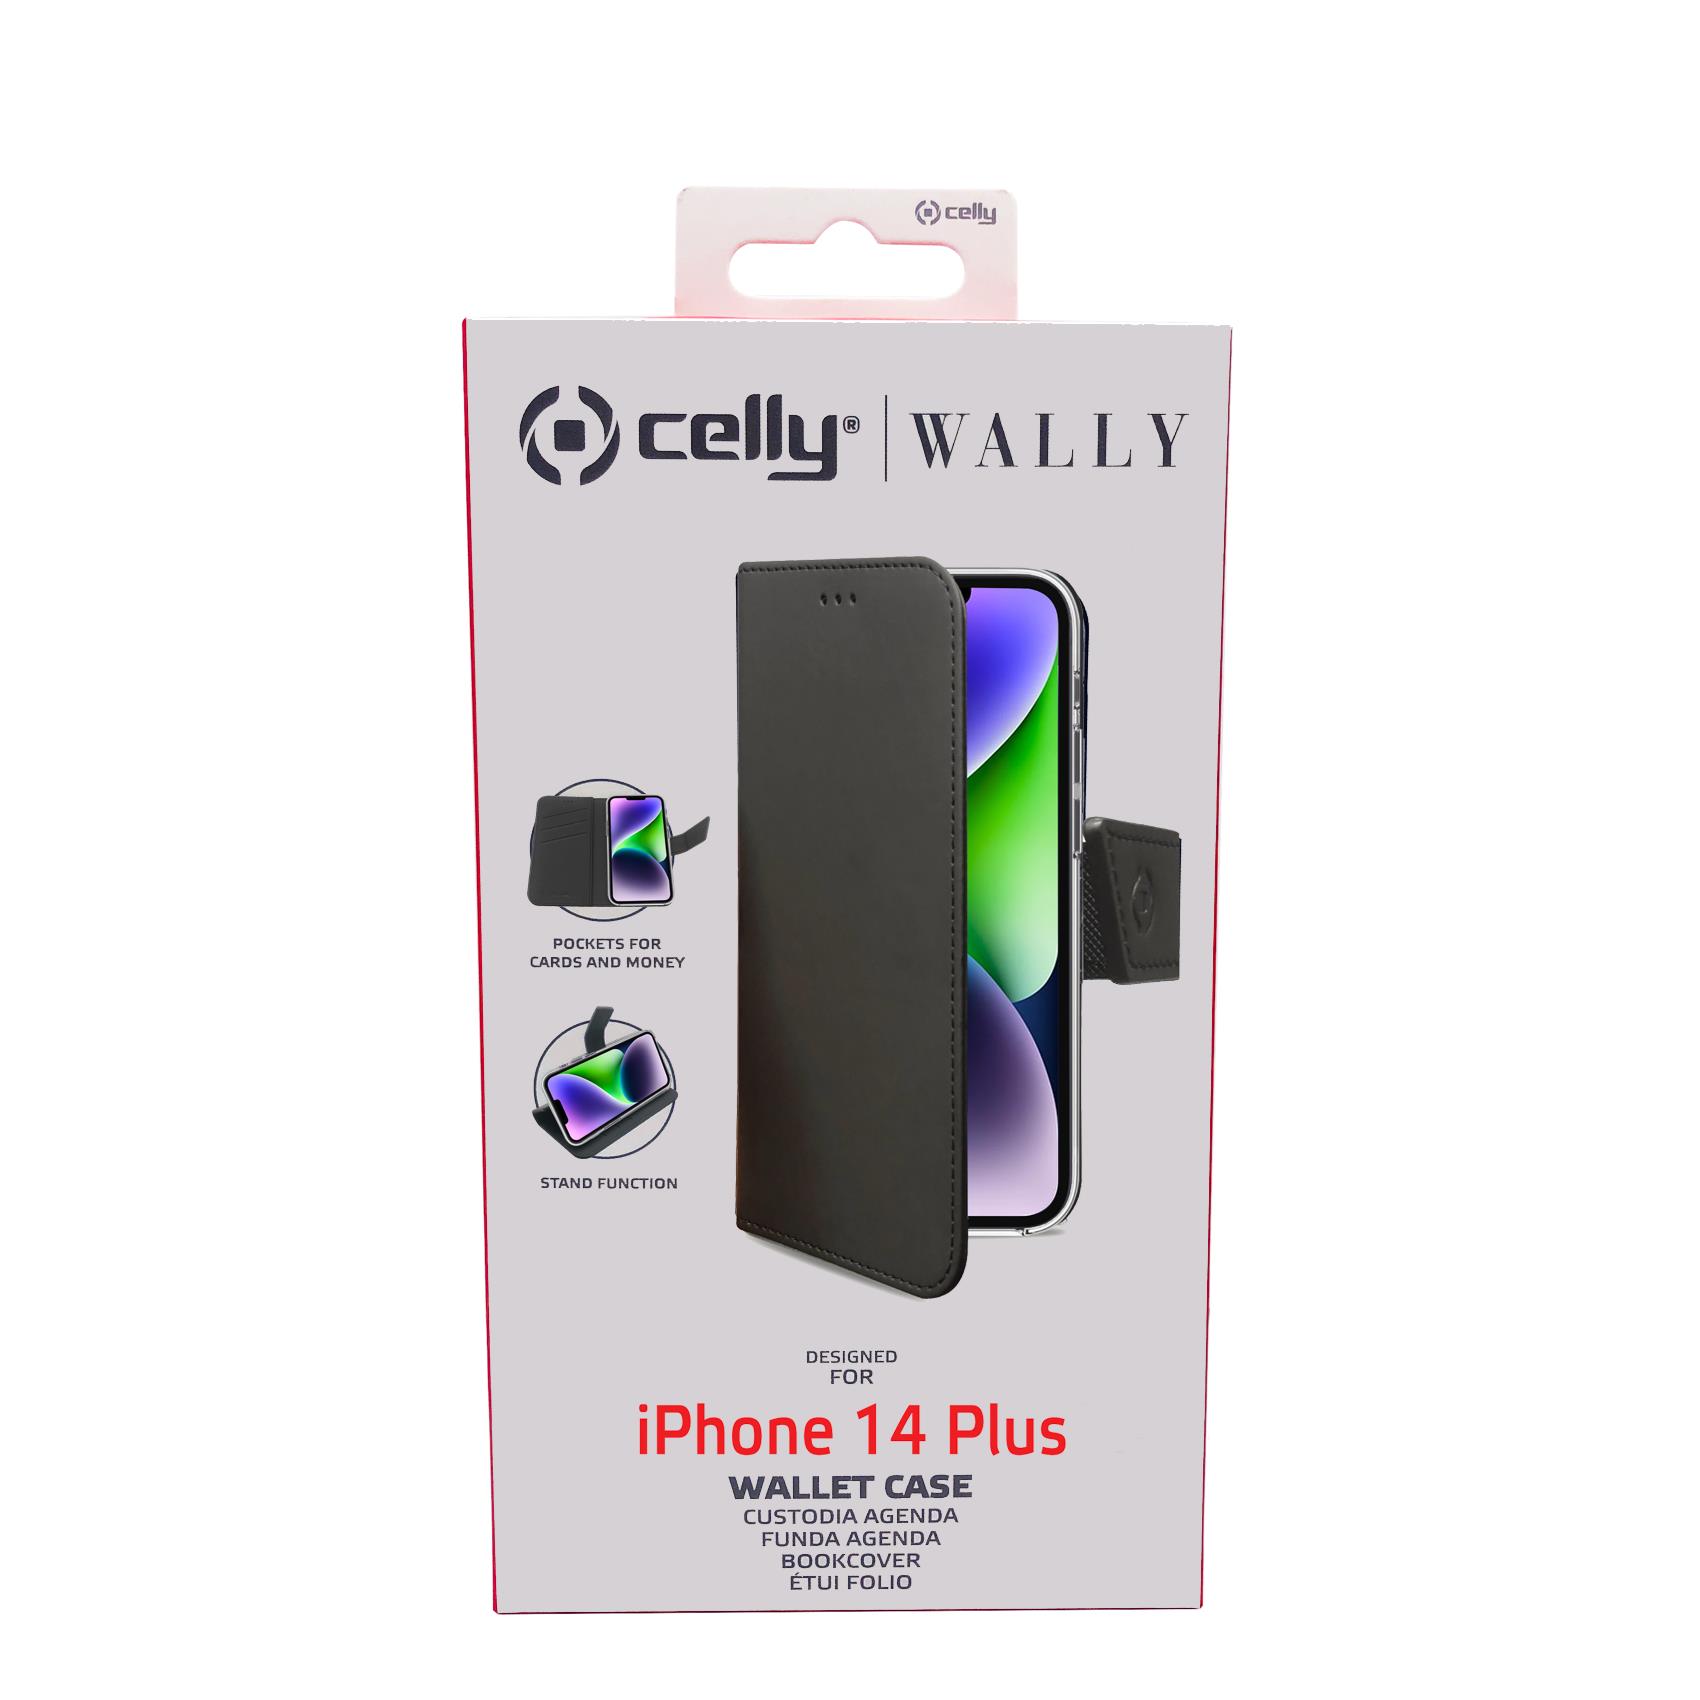 Wally Case Iphone 14 Plus Black Celly Wally1026 8021735196815